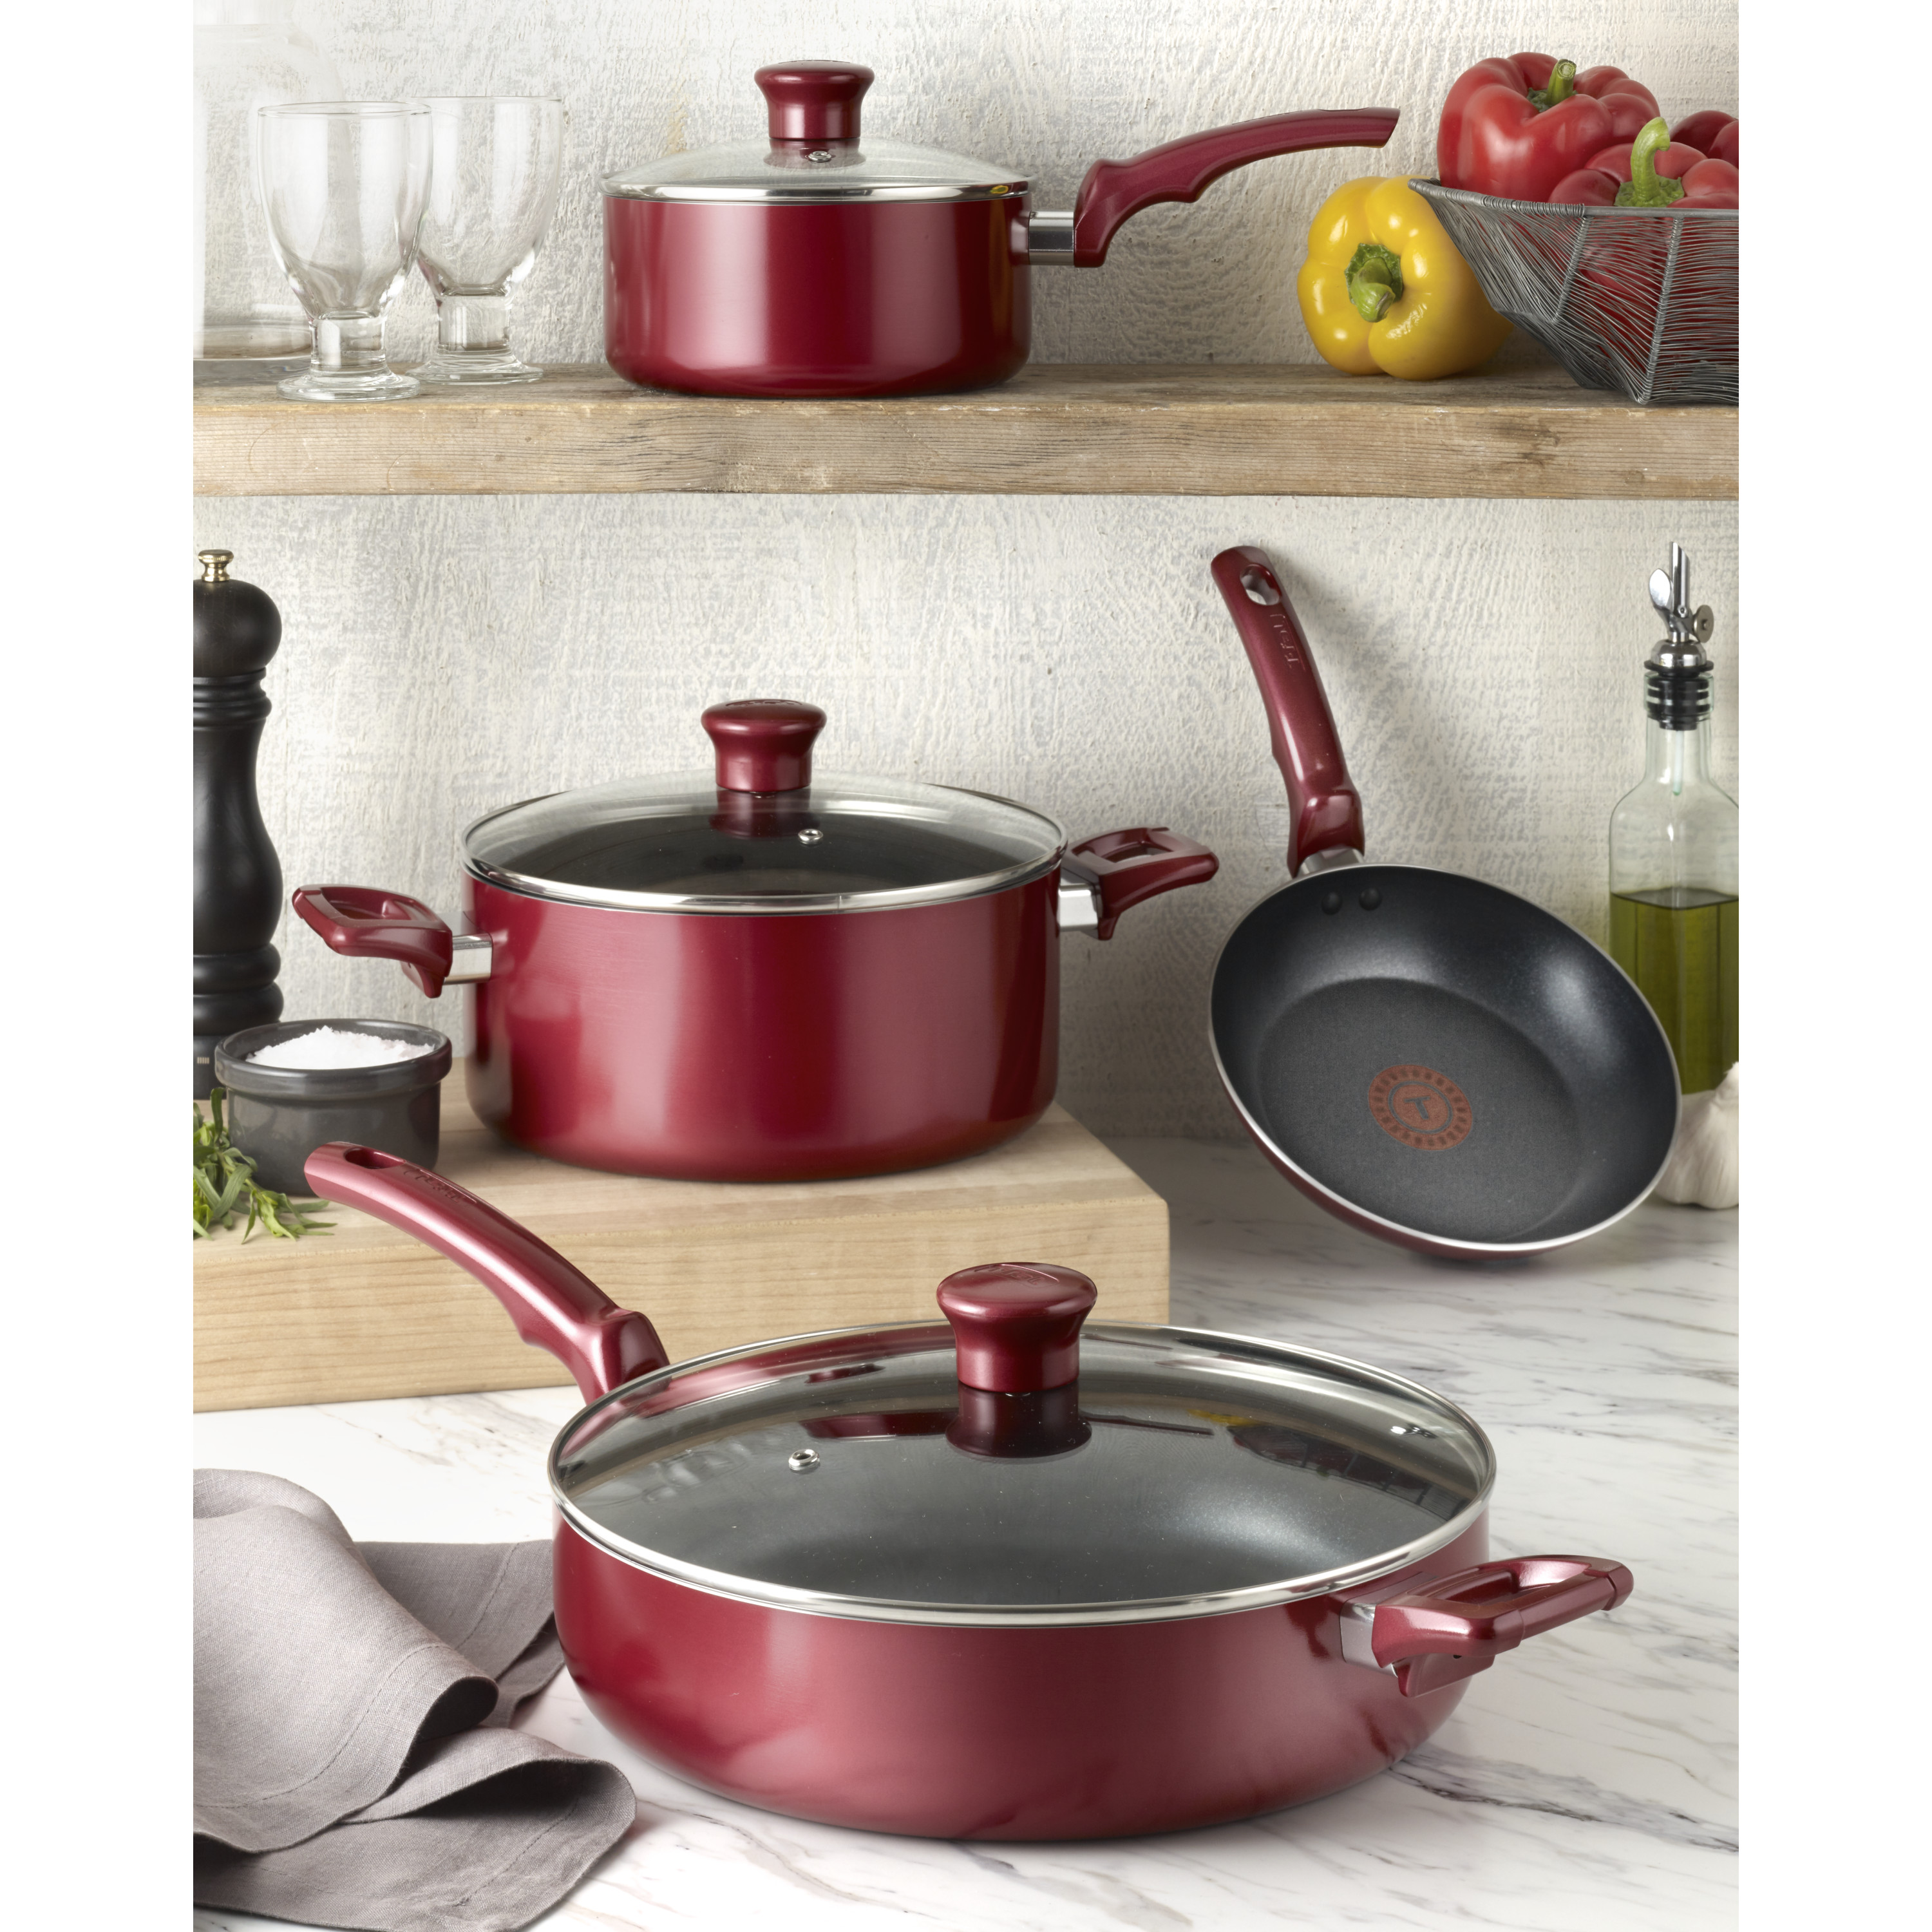 T-fal Kitchen Solutions Cookware Set, Red, 20 Pieces - image 4 of 25